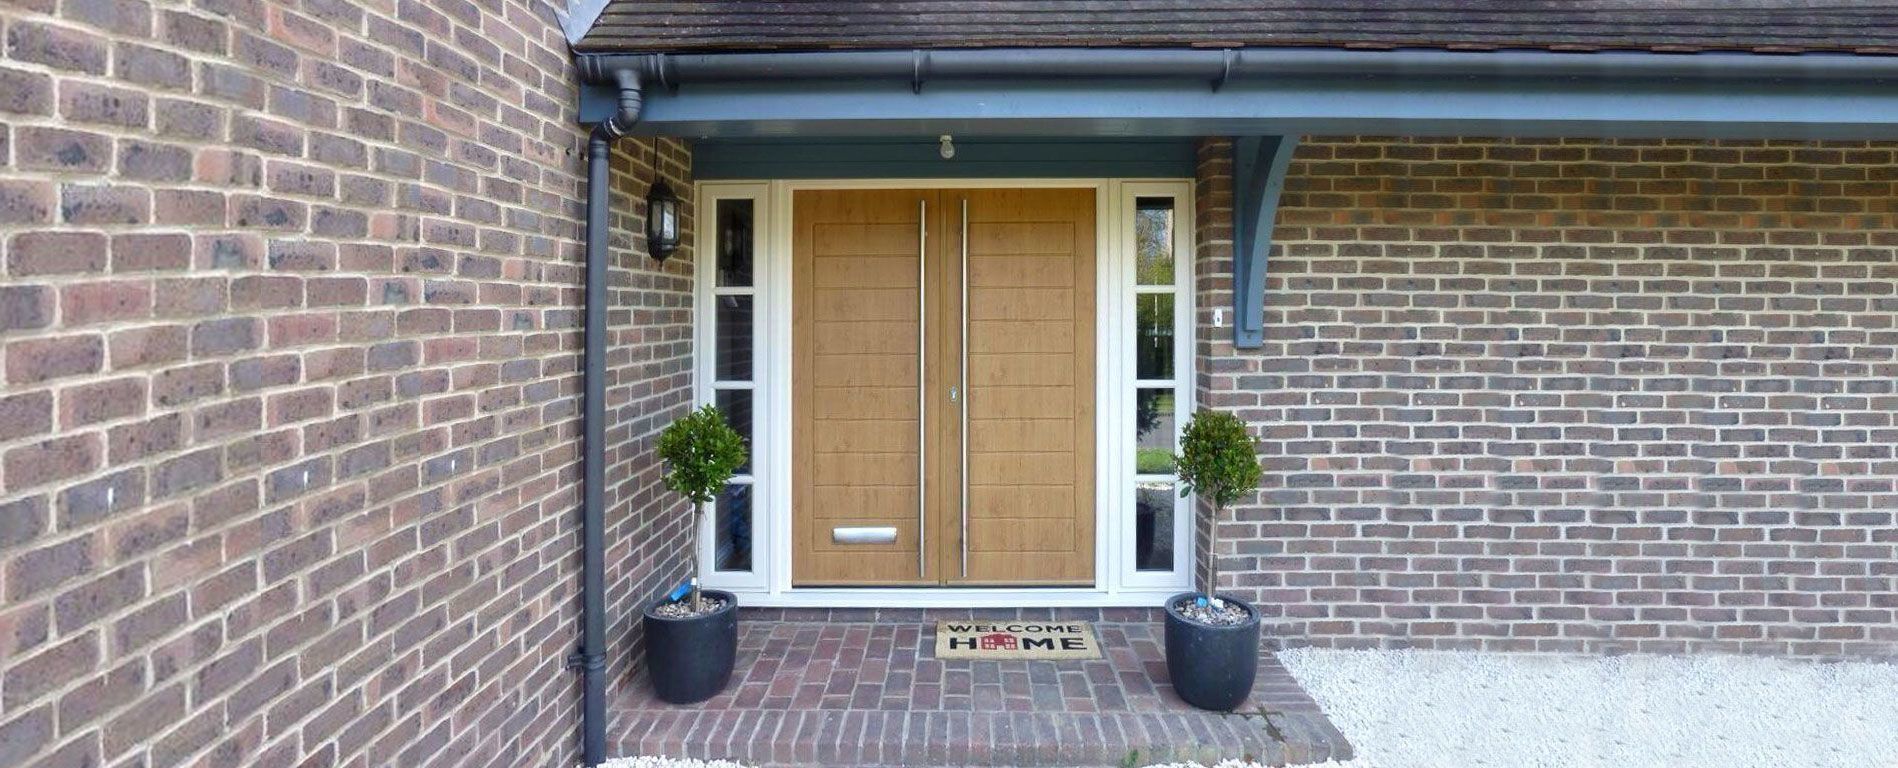 Residential house with modern style Endurance composite double doors